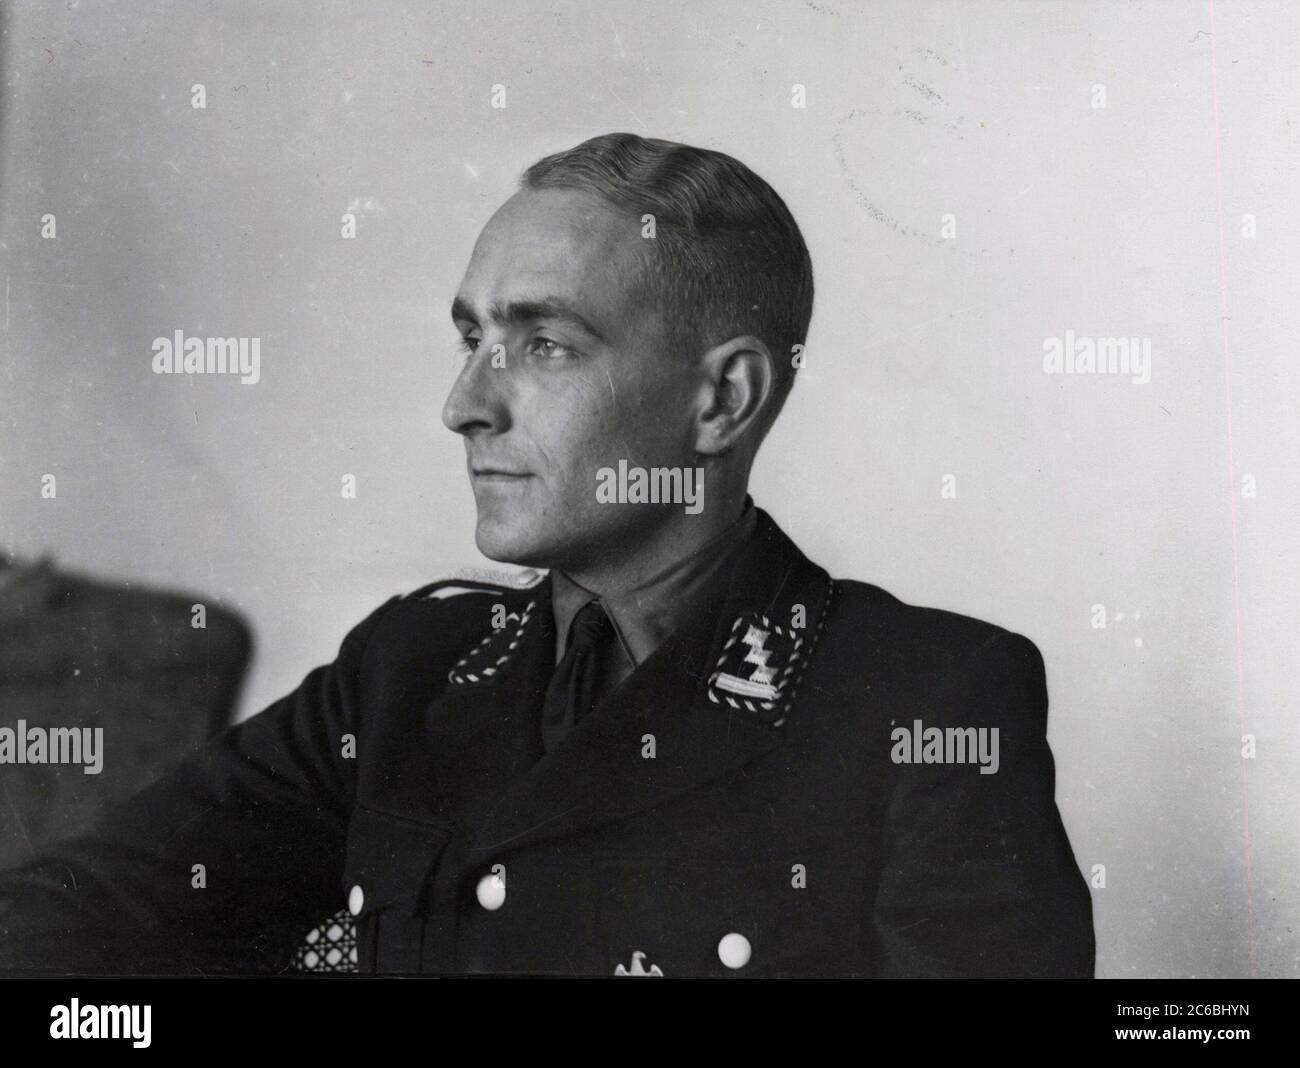 Stenge, adjutant of Rudolf Hess - portrait Heinrich Hoffmann Photographs 1934 Adolf Hitler's official photographer, and a Nazi politician and publisher, who was a member of Hitler's intimate circle. Stock Photo